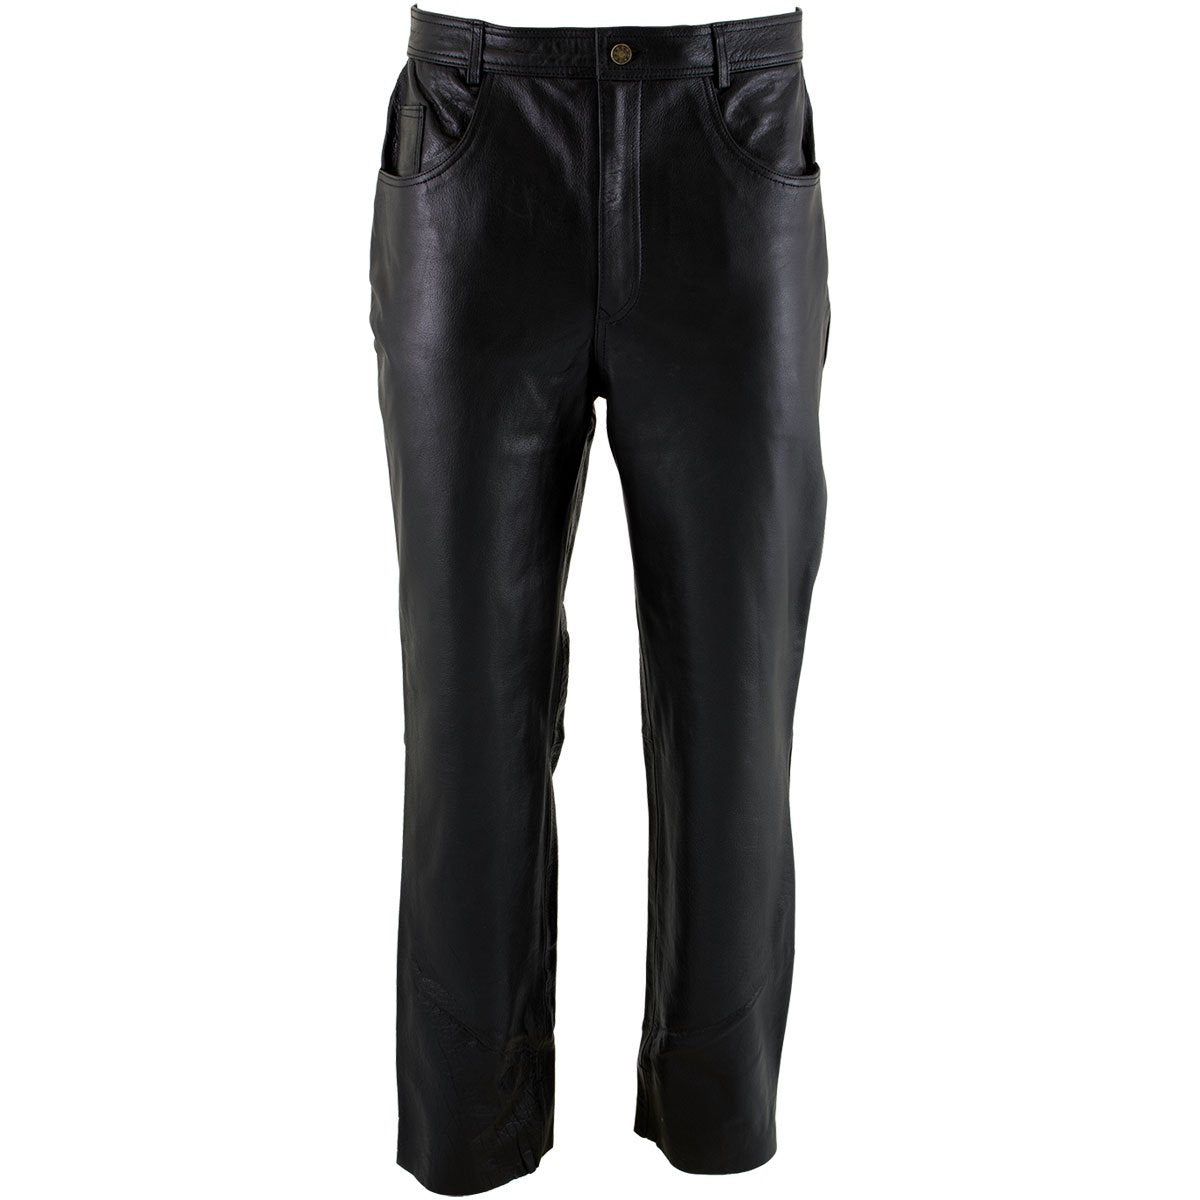  Milwaukee Leather  Classic Fit 5 Pocket Leather Pants